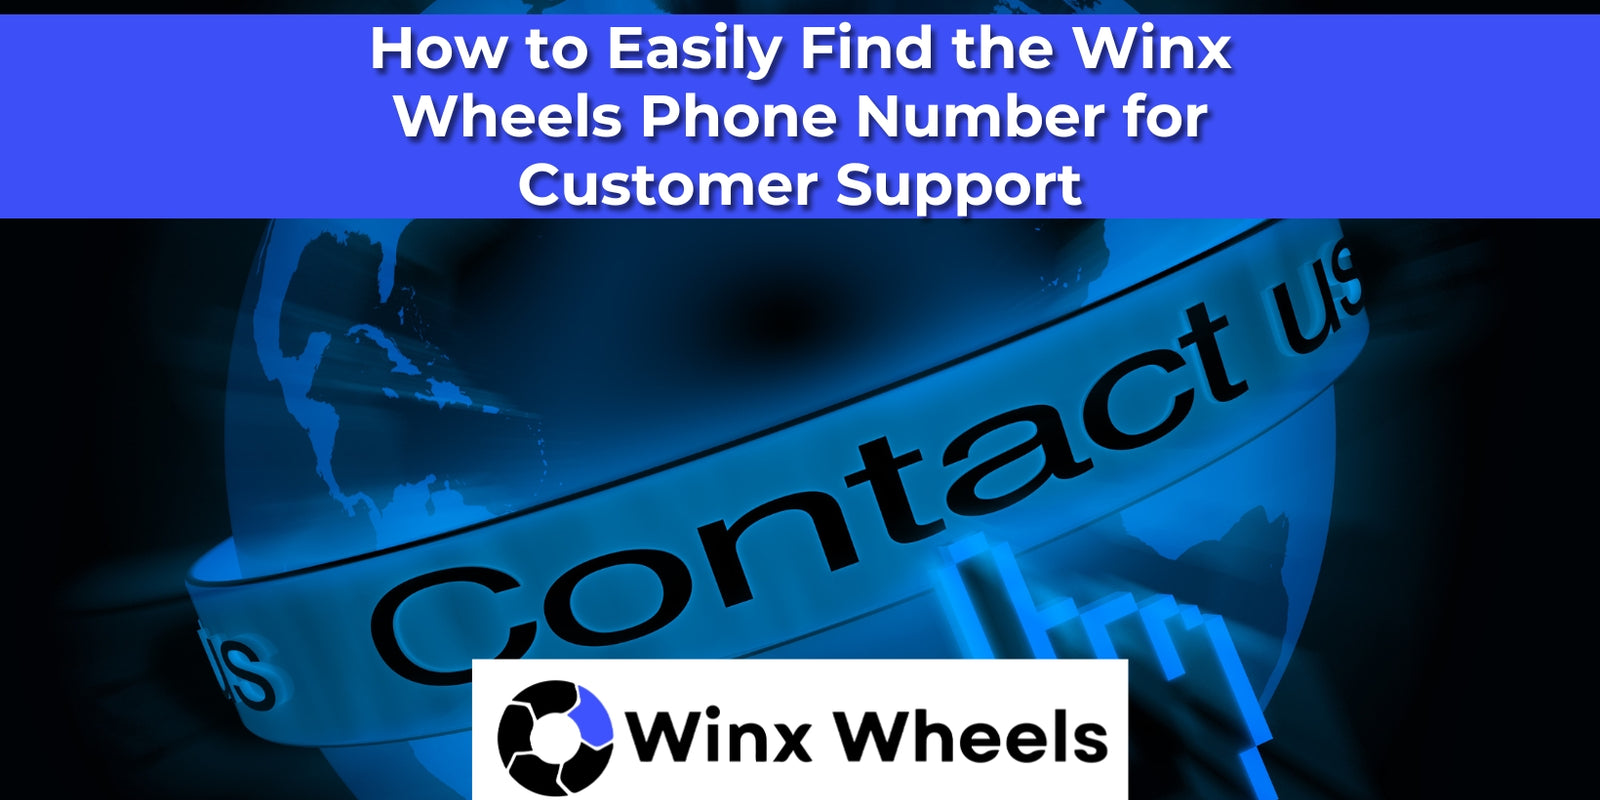 How to Easily Find the Winx Wheels Phone Number for Customer Support